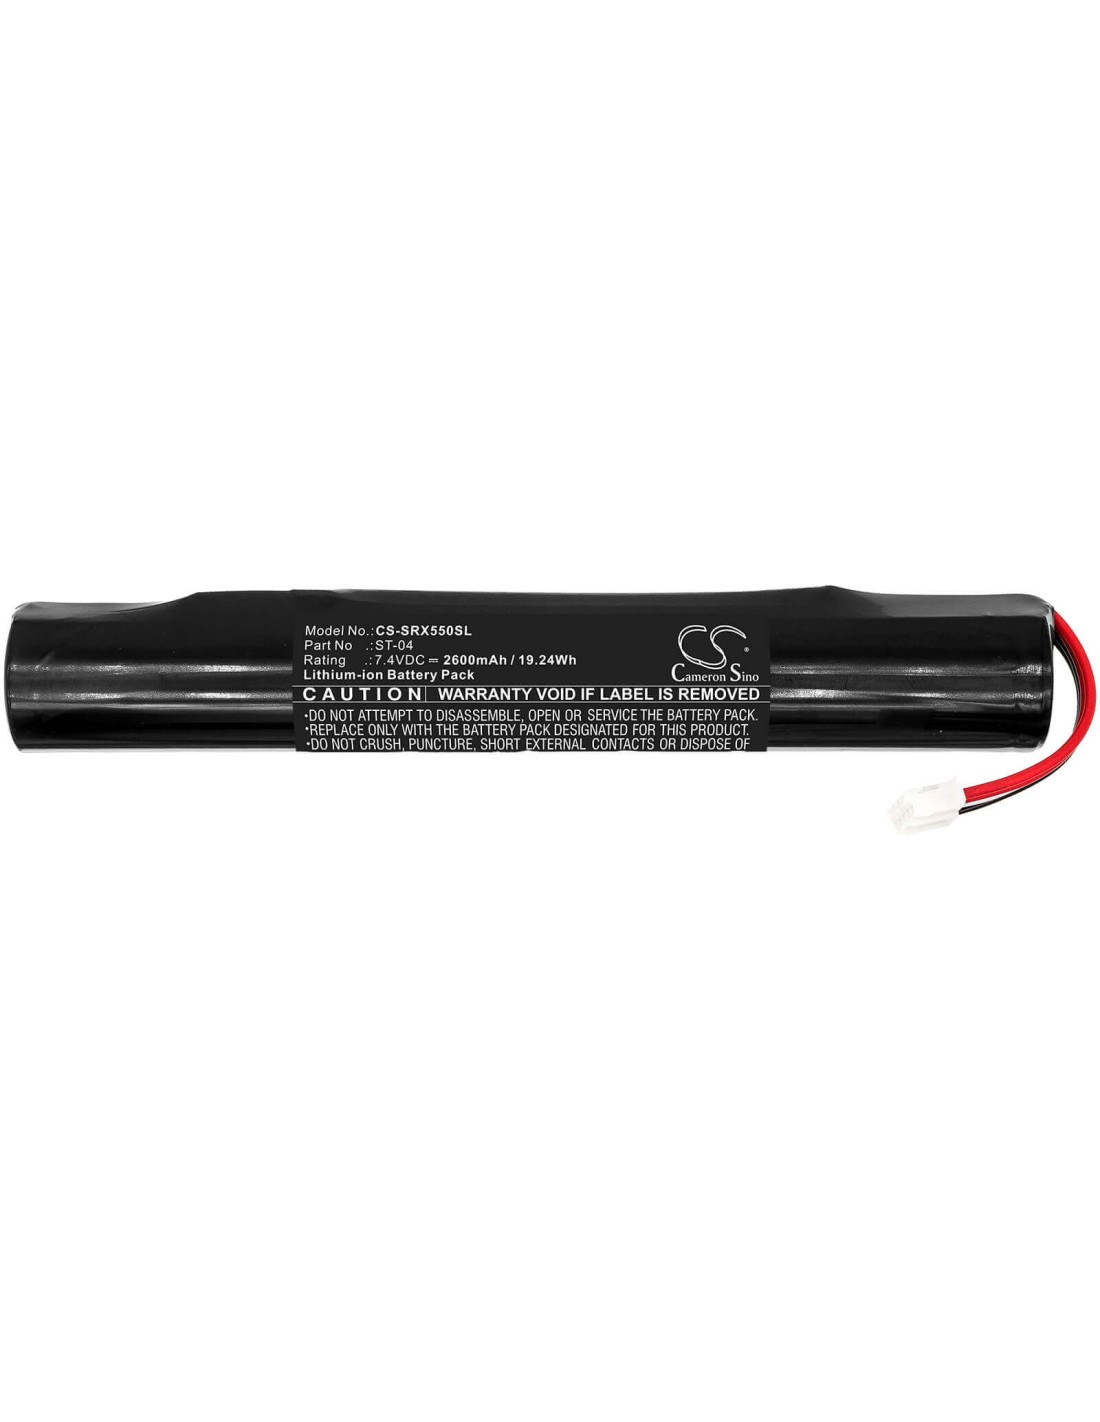 Battery for Sony, Srs-x55, Srs-x77 7.4V, 2600mAh - 19.24Wh